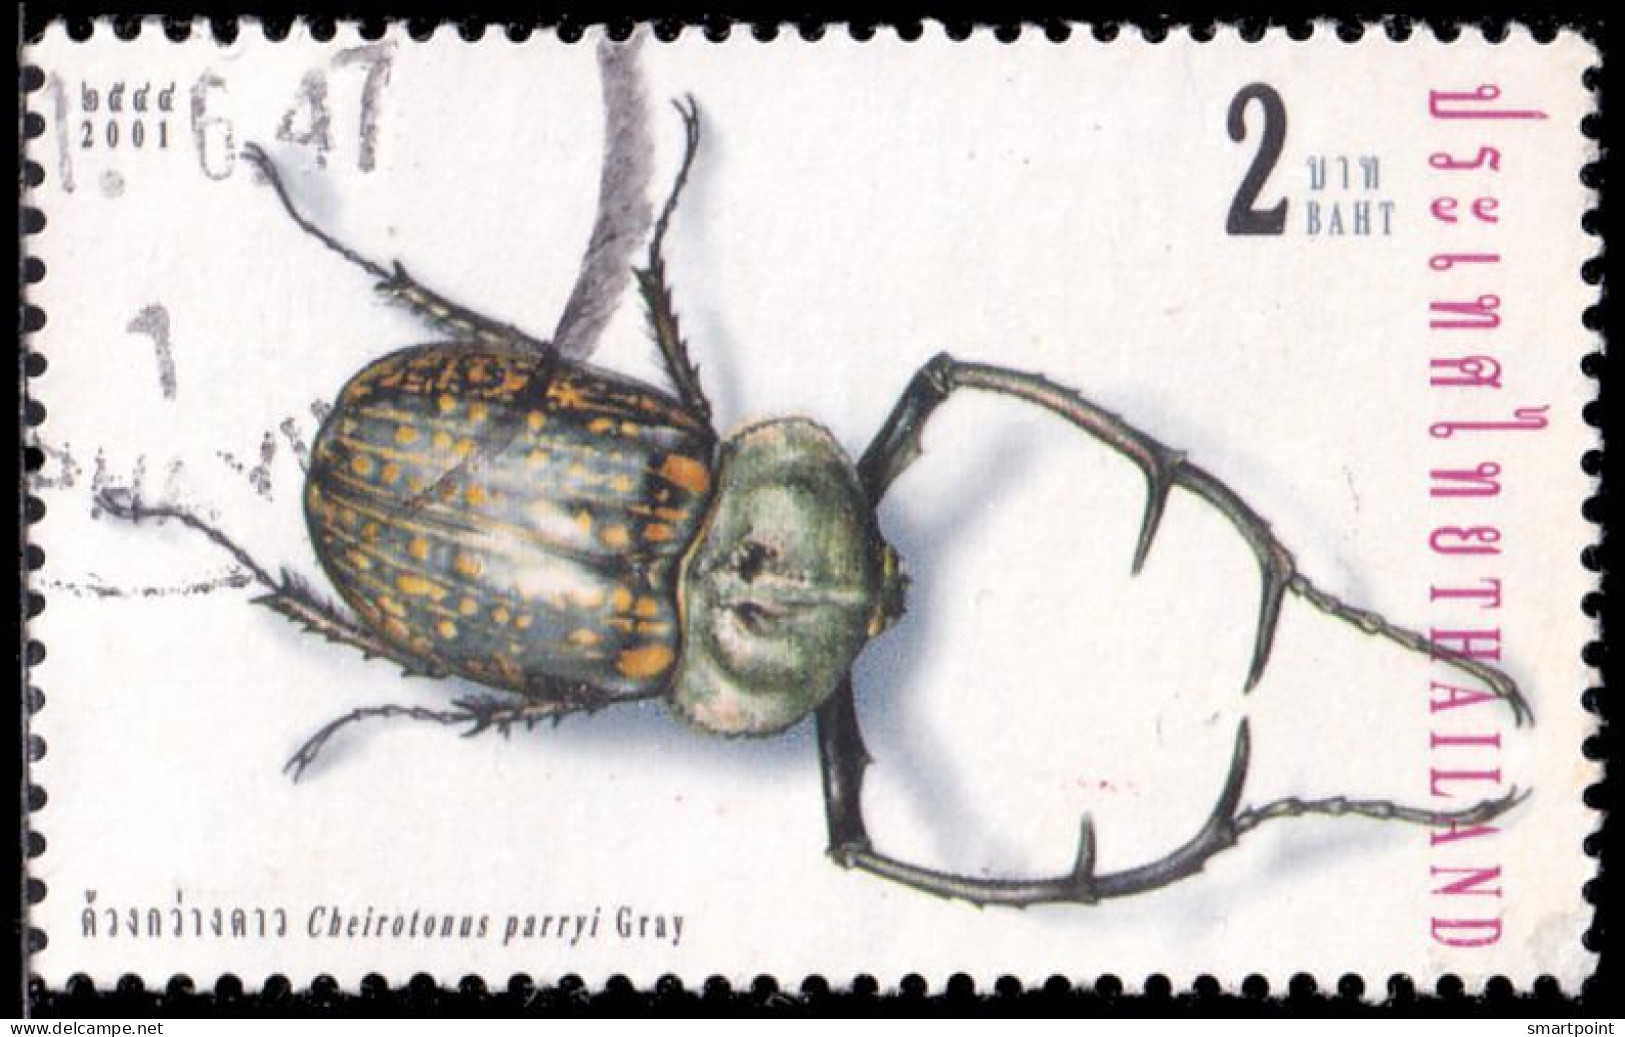 Thailand Stamp 2001 Insects (2nd Series) 2 Baht - Used - Tailandia